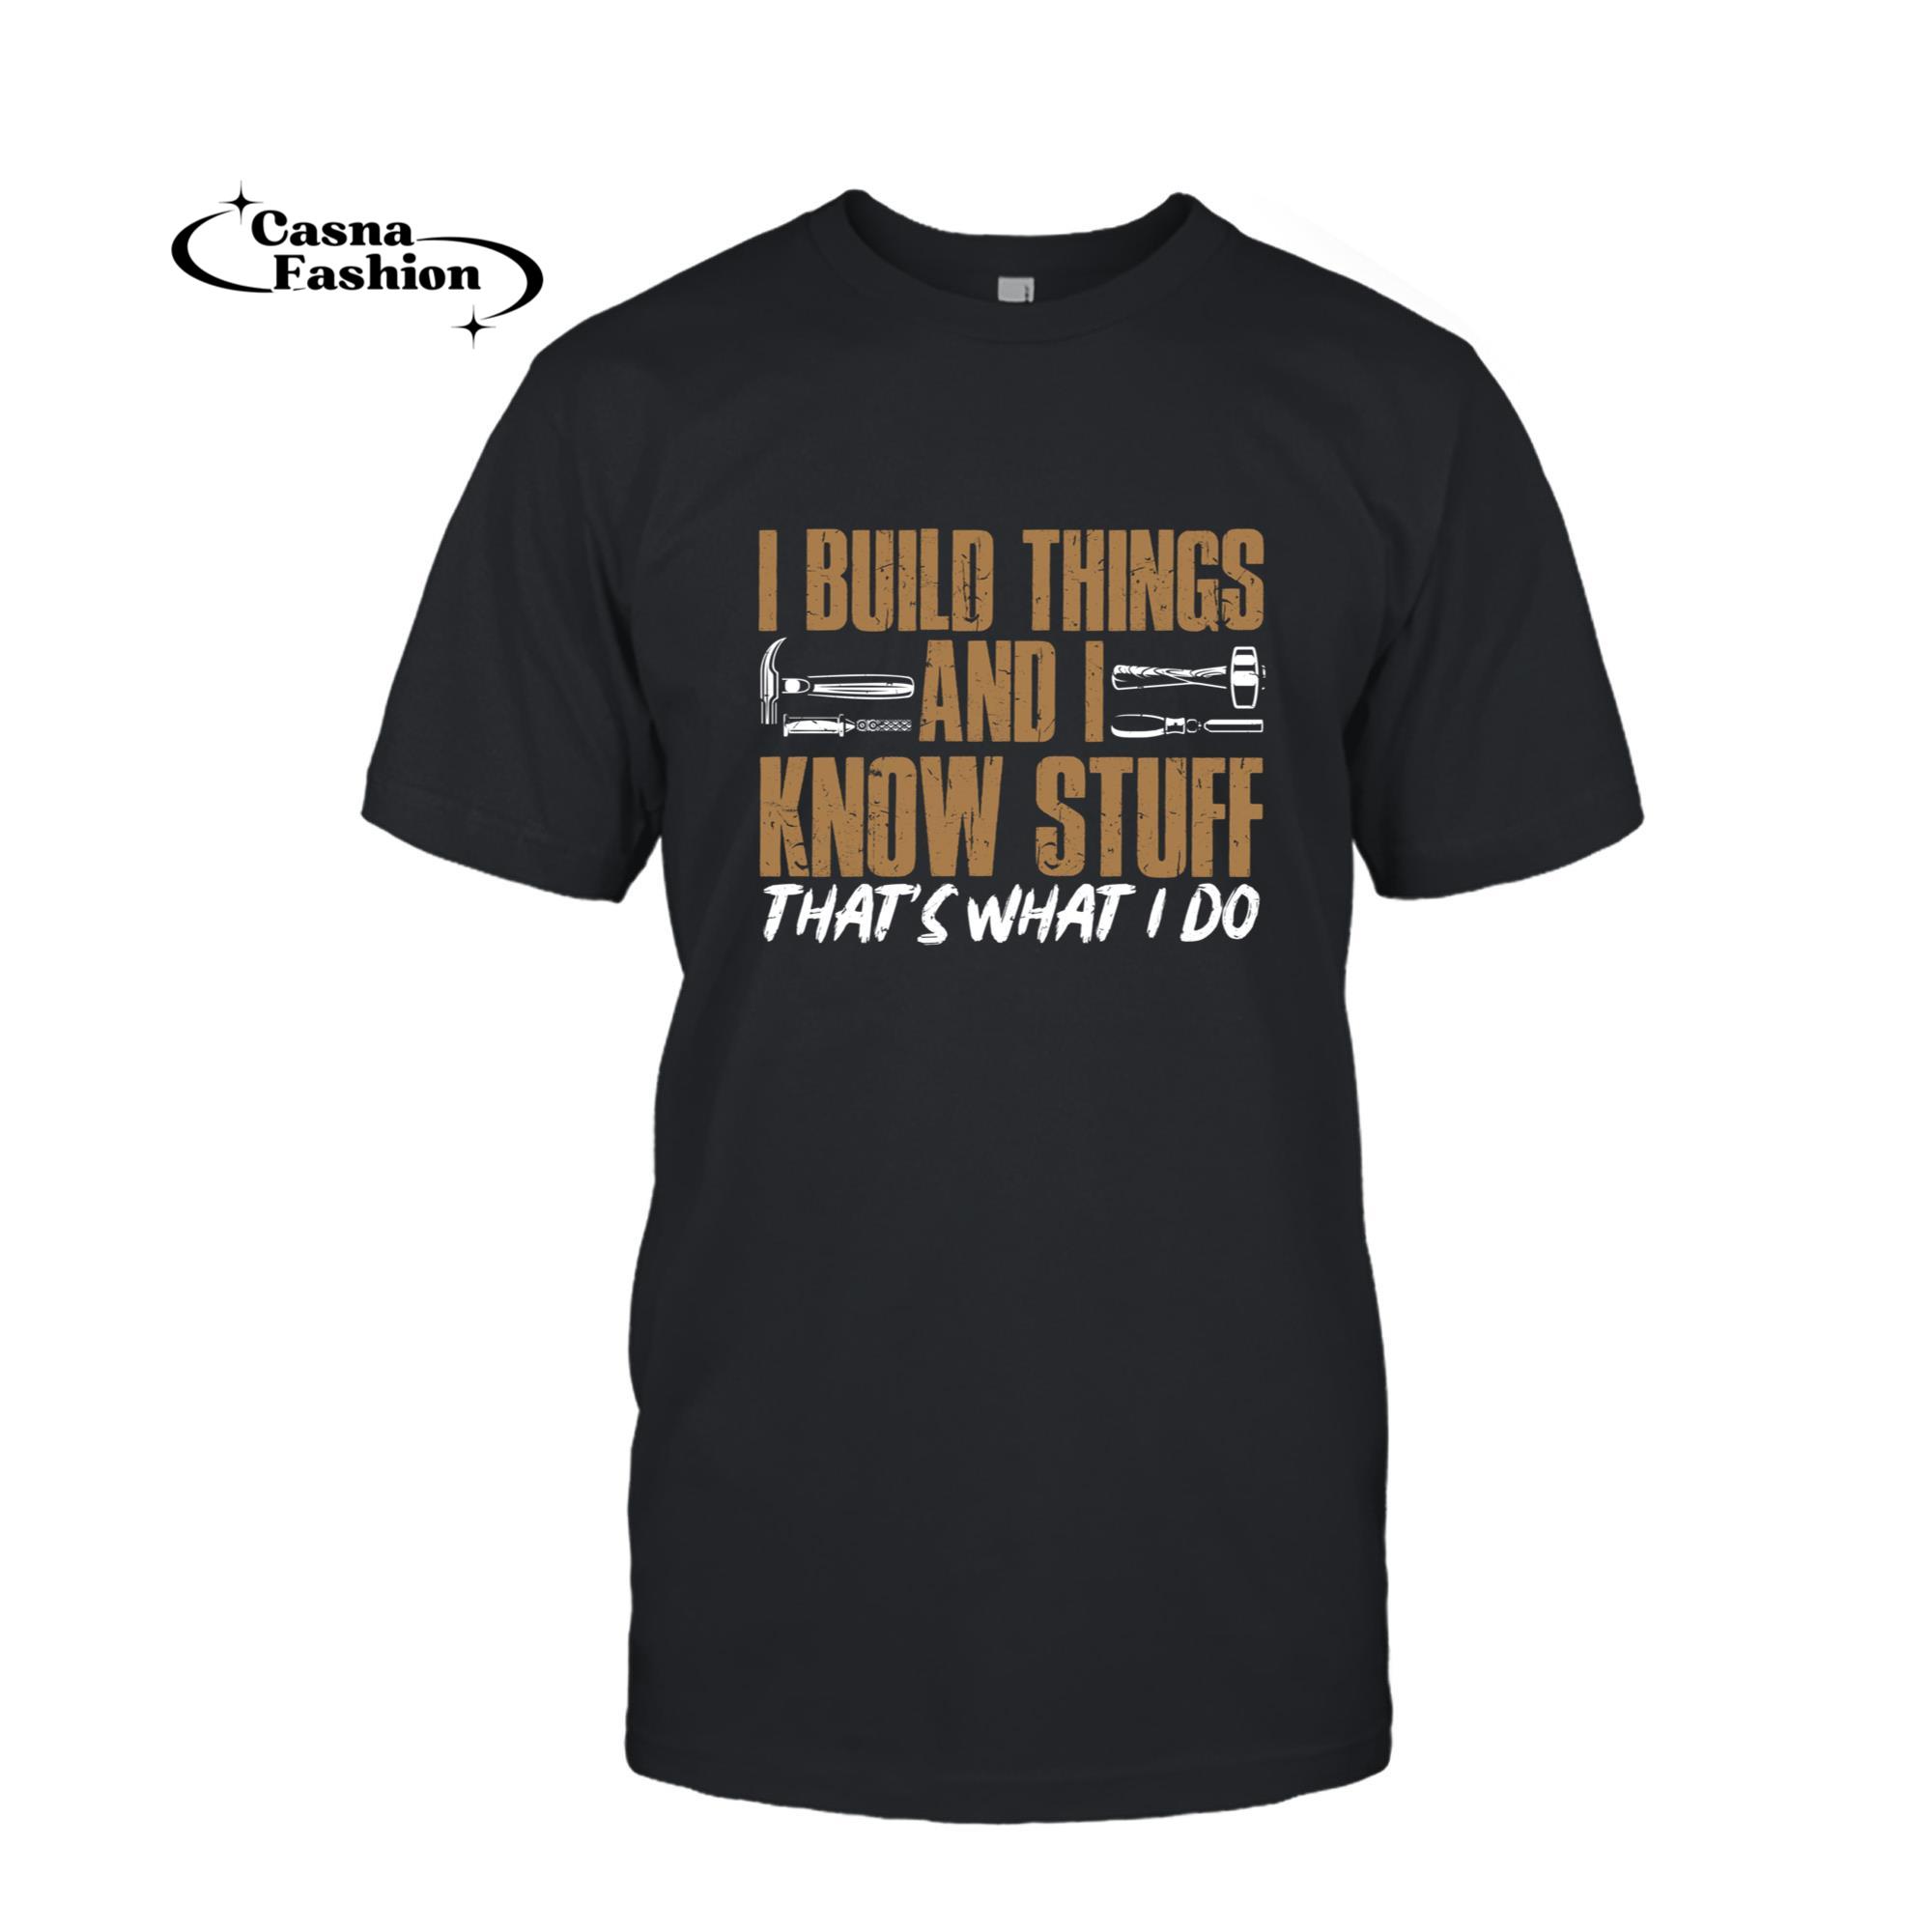 casnafashion_T-shirt_I Build Things And I Know Stuff That's What I Do Long Sleeve T-Shirt_T-shirt_Black